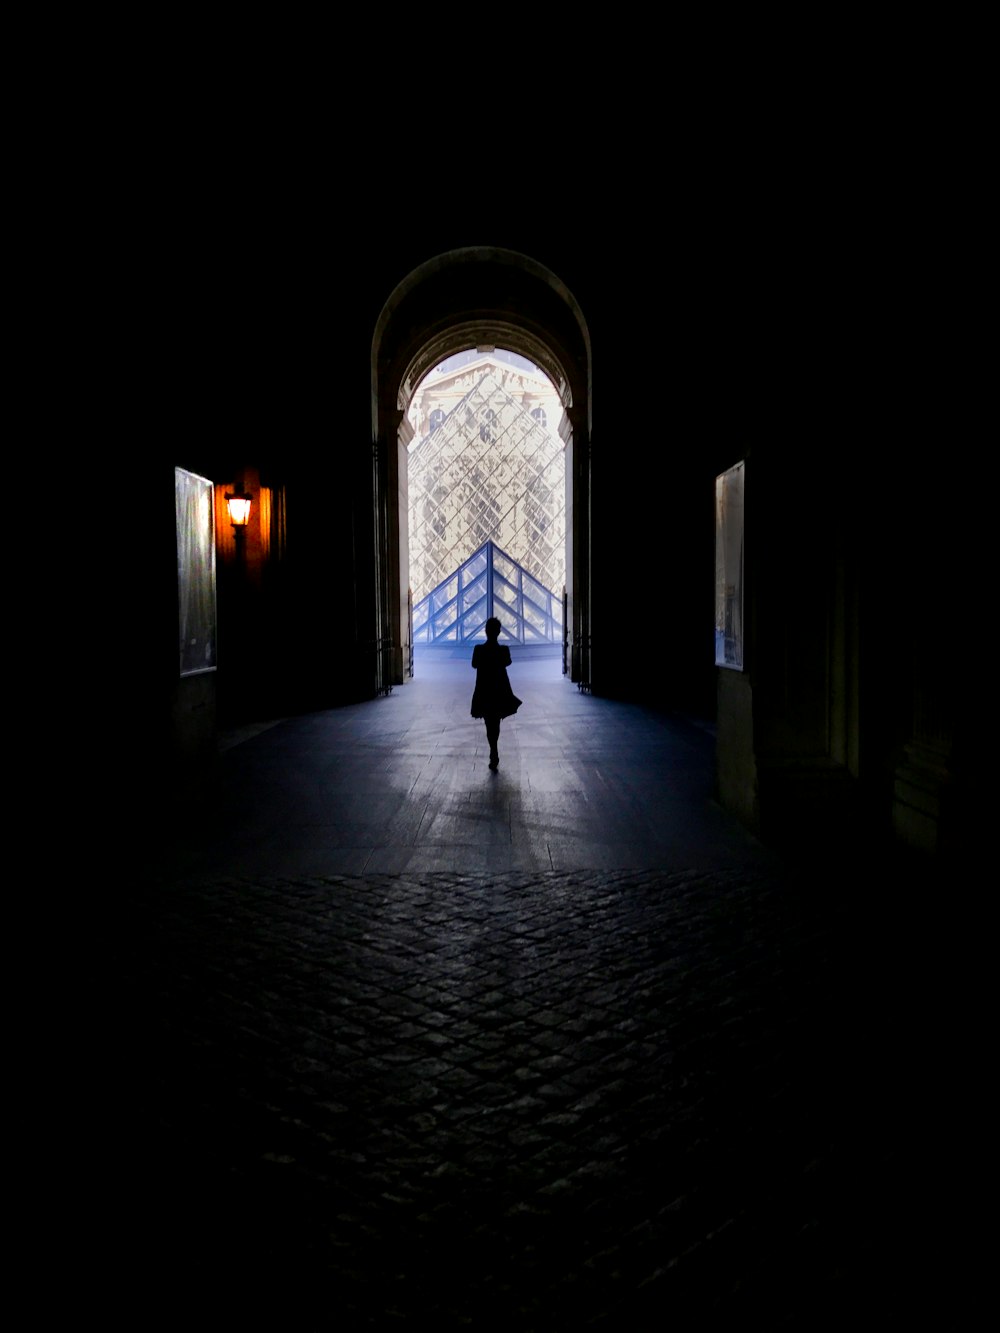 silhouette of person walking inside building